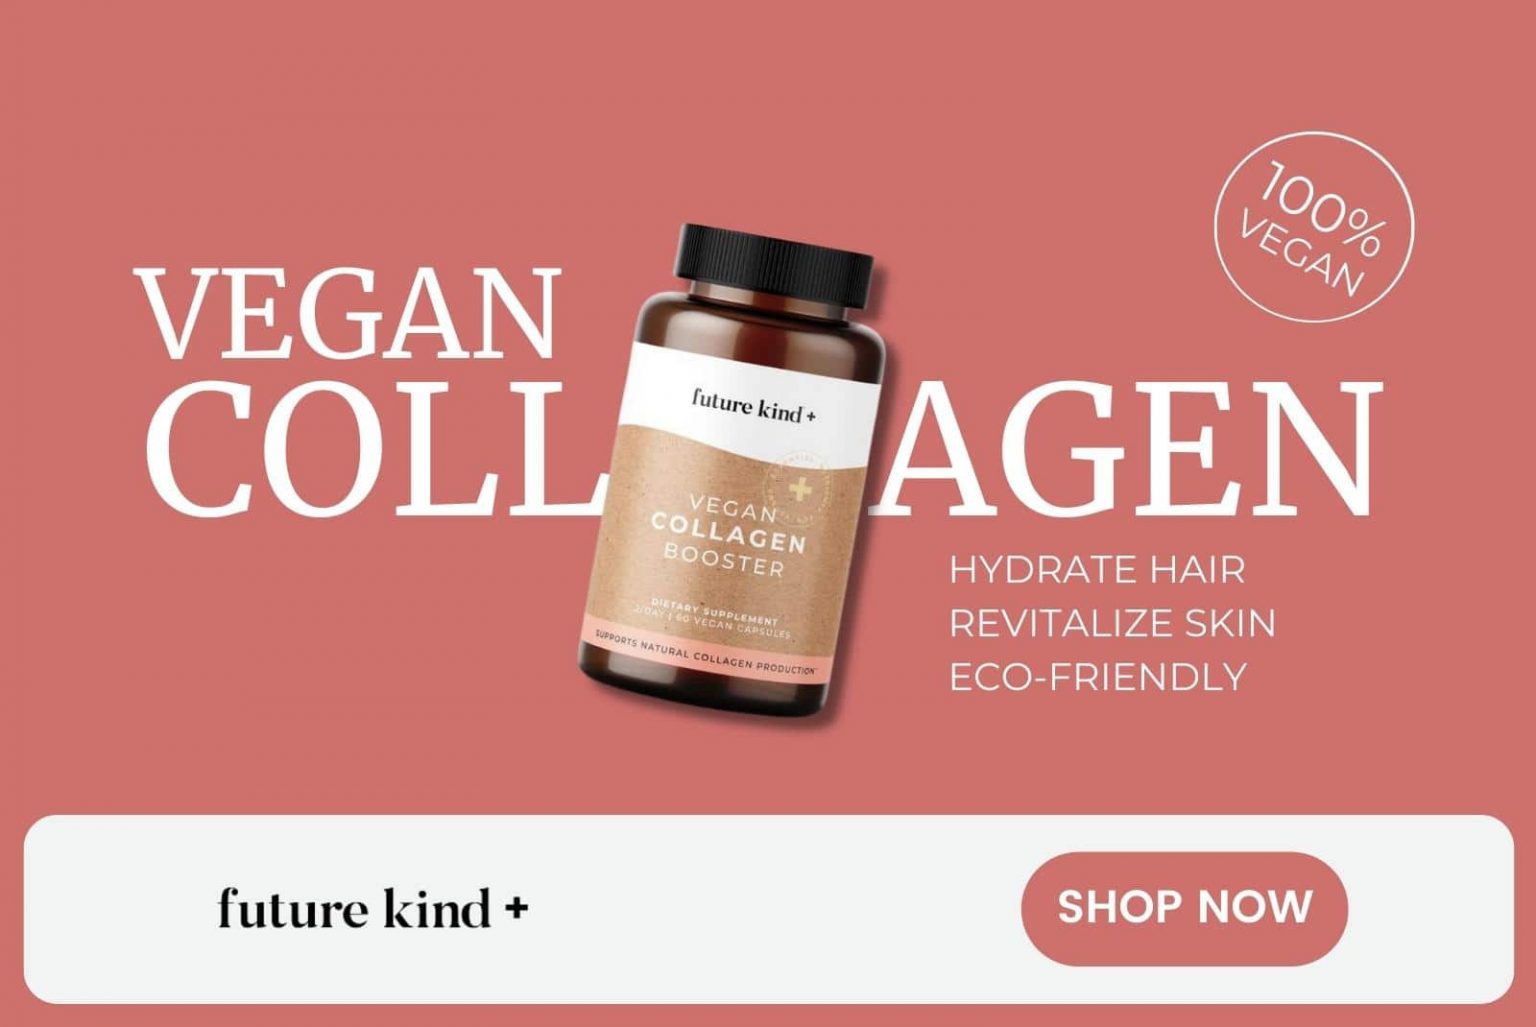 Your own collagen is the best collagen, which is why future kind+ advanced plant-powered collagen booster harnesses 16 natural collagen boosting nutrients including silica, biotin, grape-seed extract, zinc, vitamin A & E and antioxidant-packed ayurvedic super berry amla!